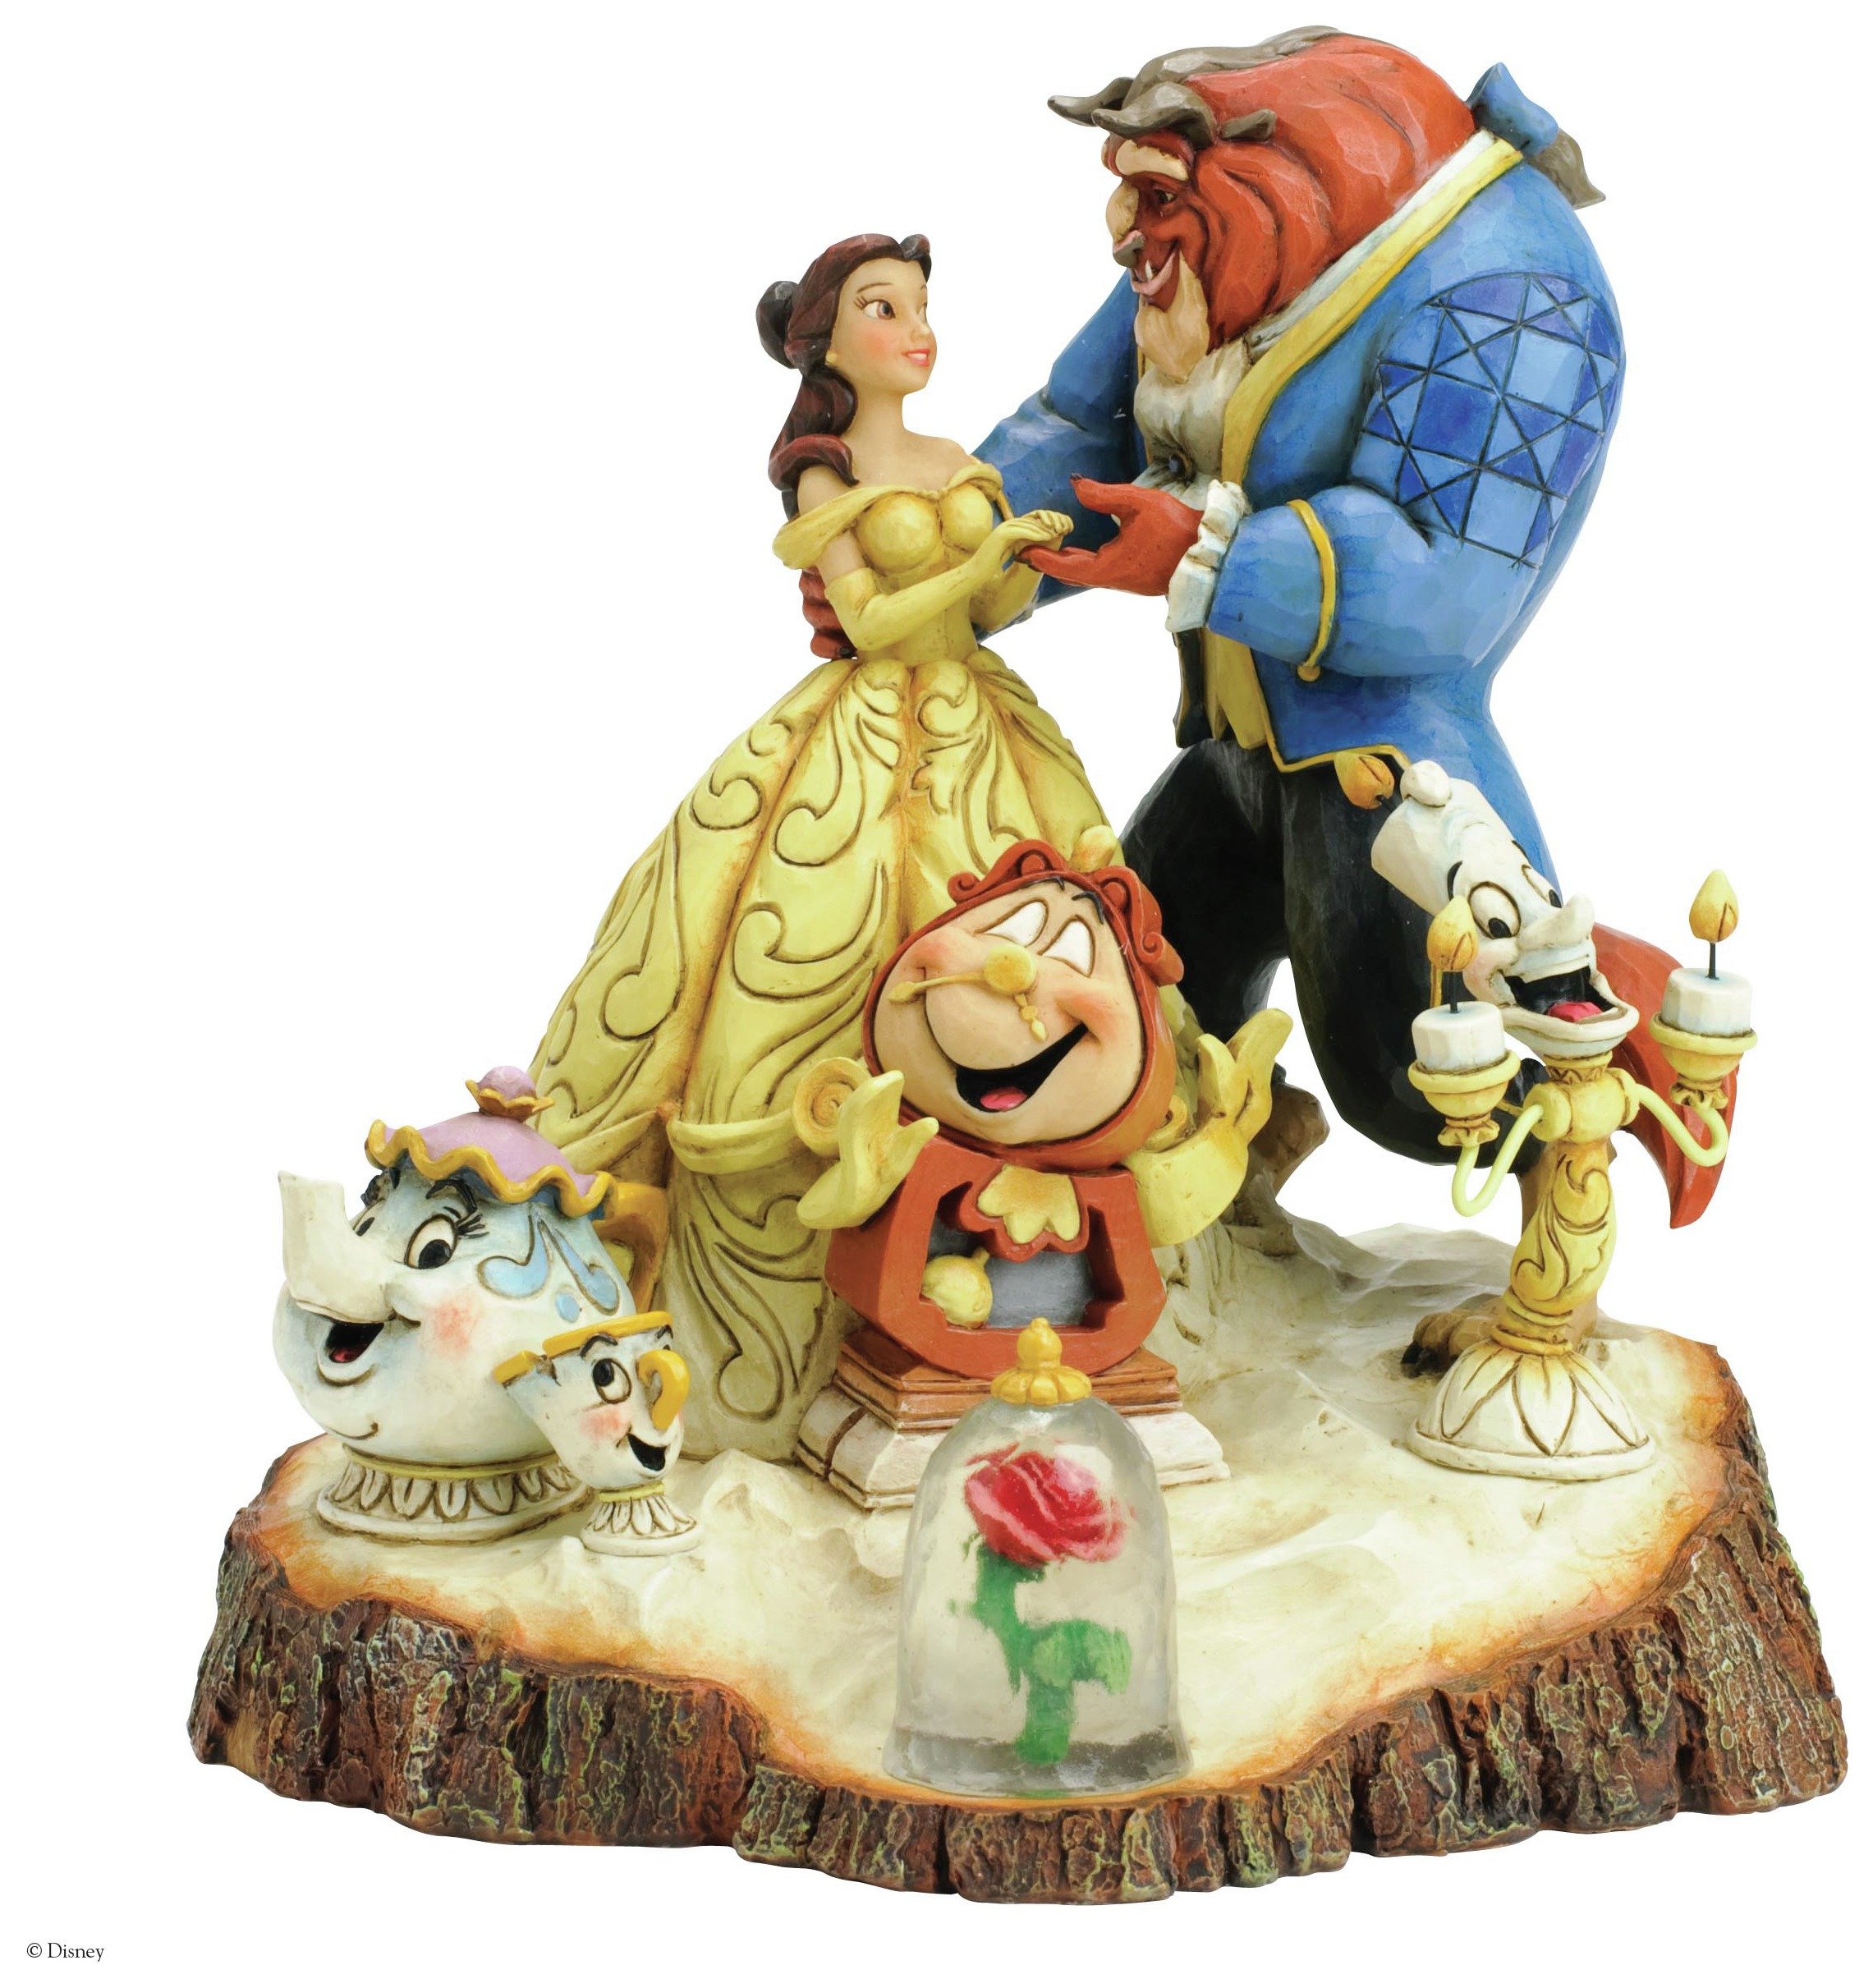 Disney Traditions Tale as old as Time Figurine.